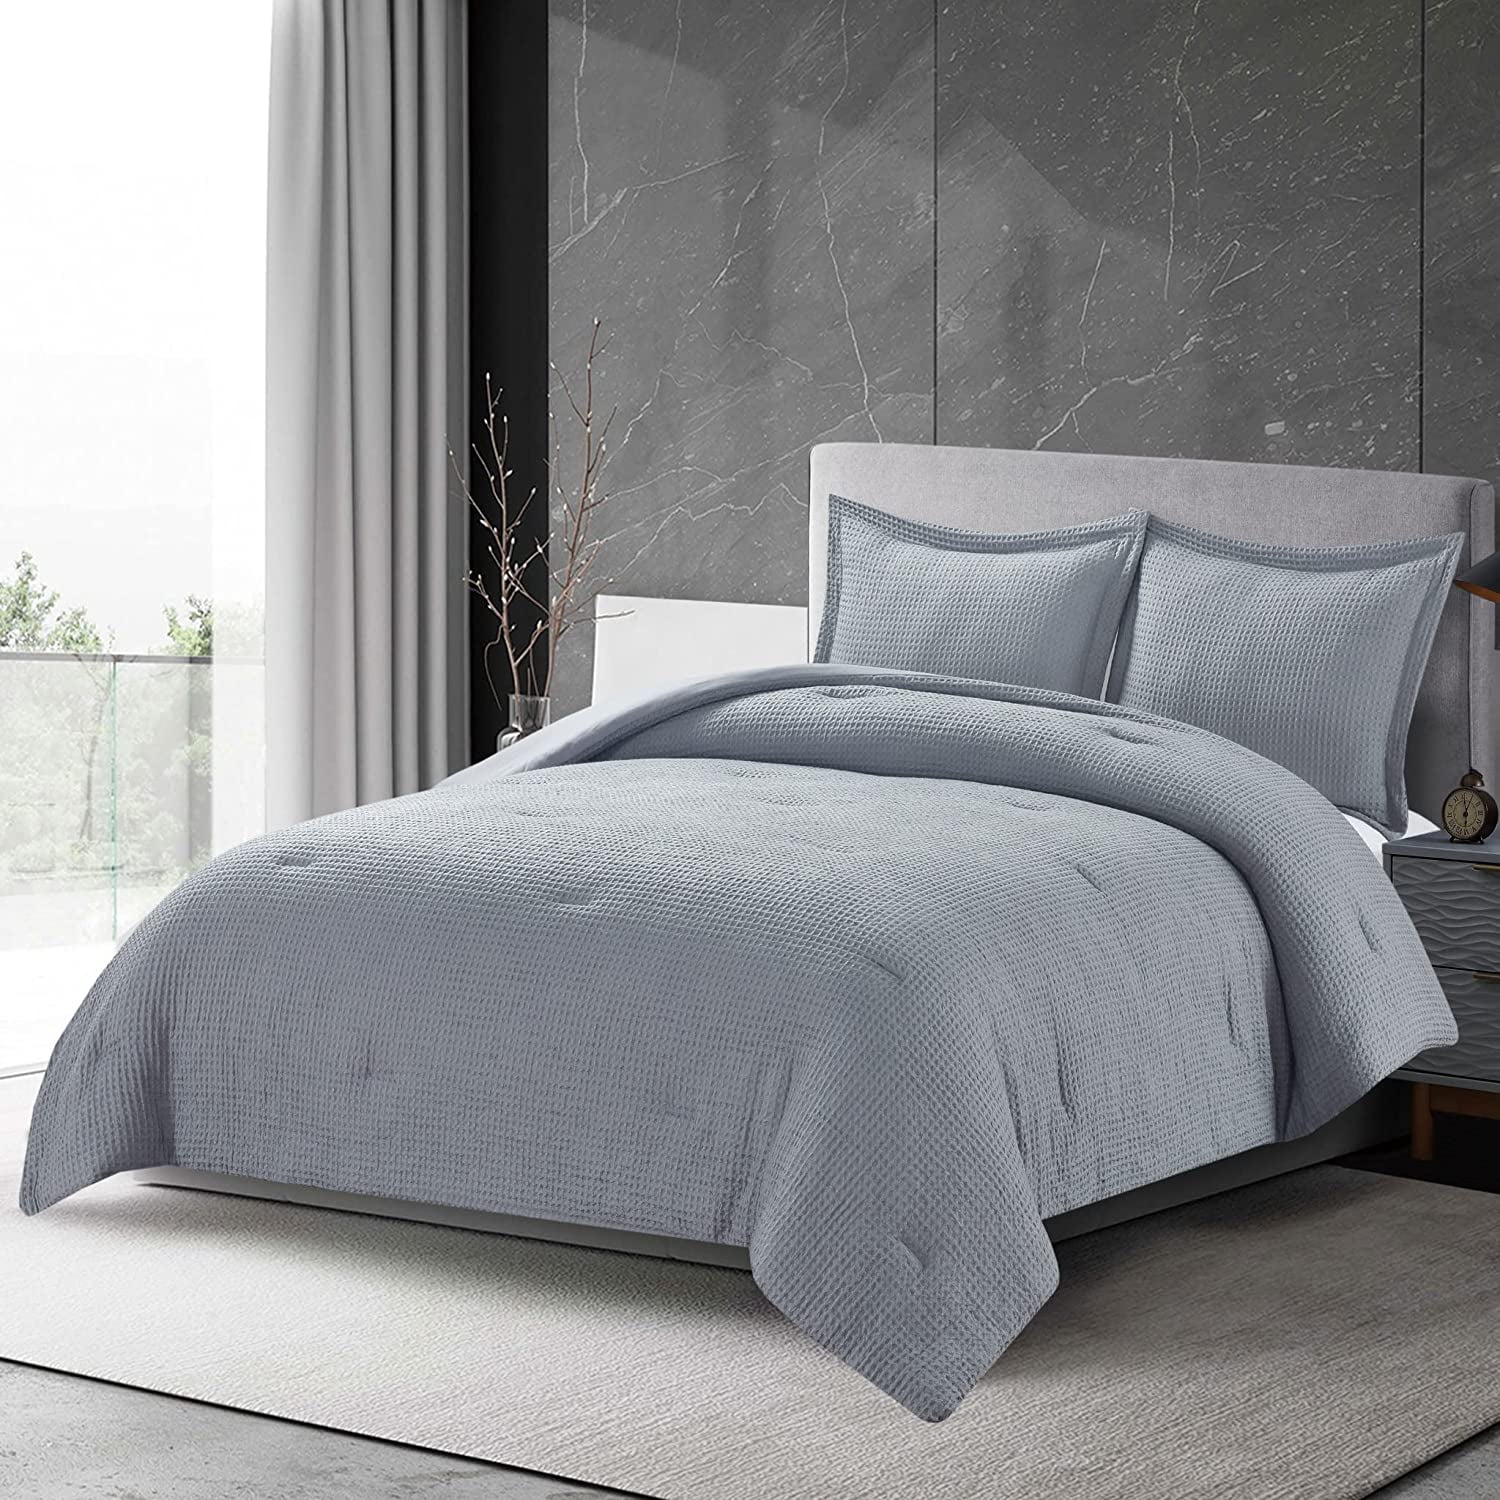 Fabstyles Arizona Chenille 3 Piece Duvet Cover Set - Grey - King